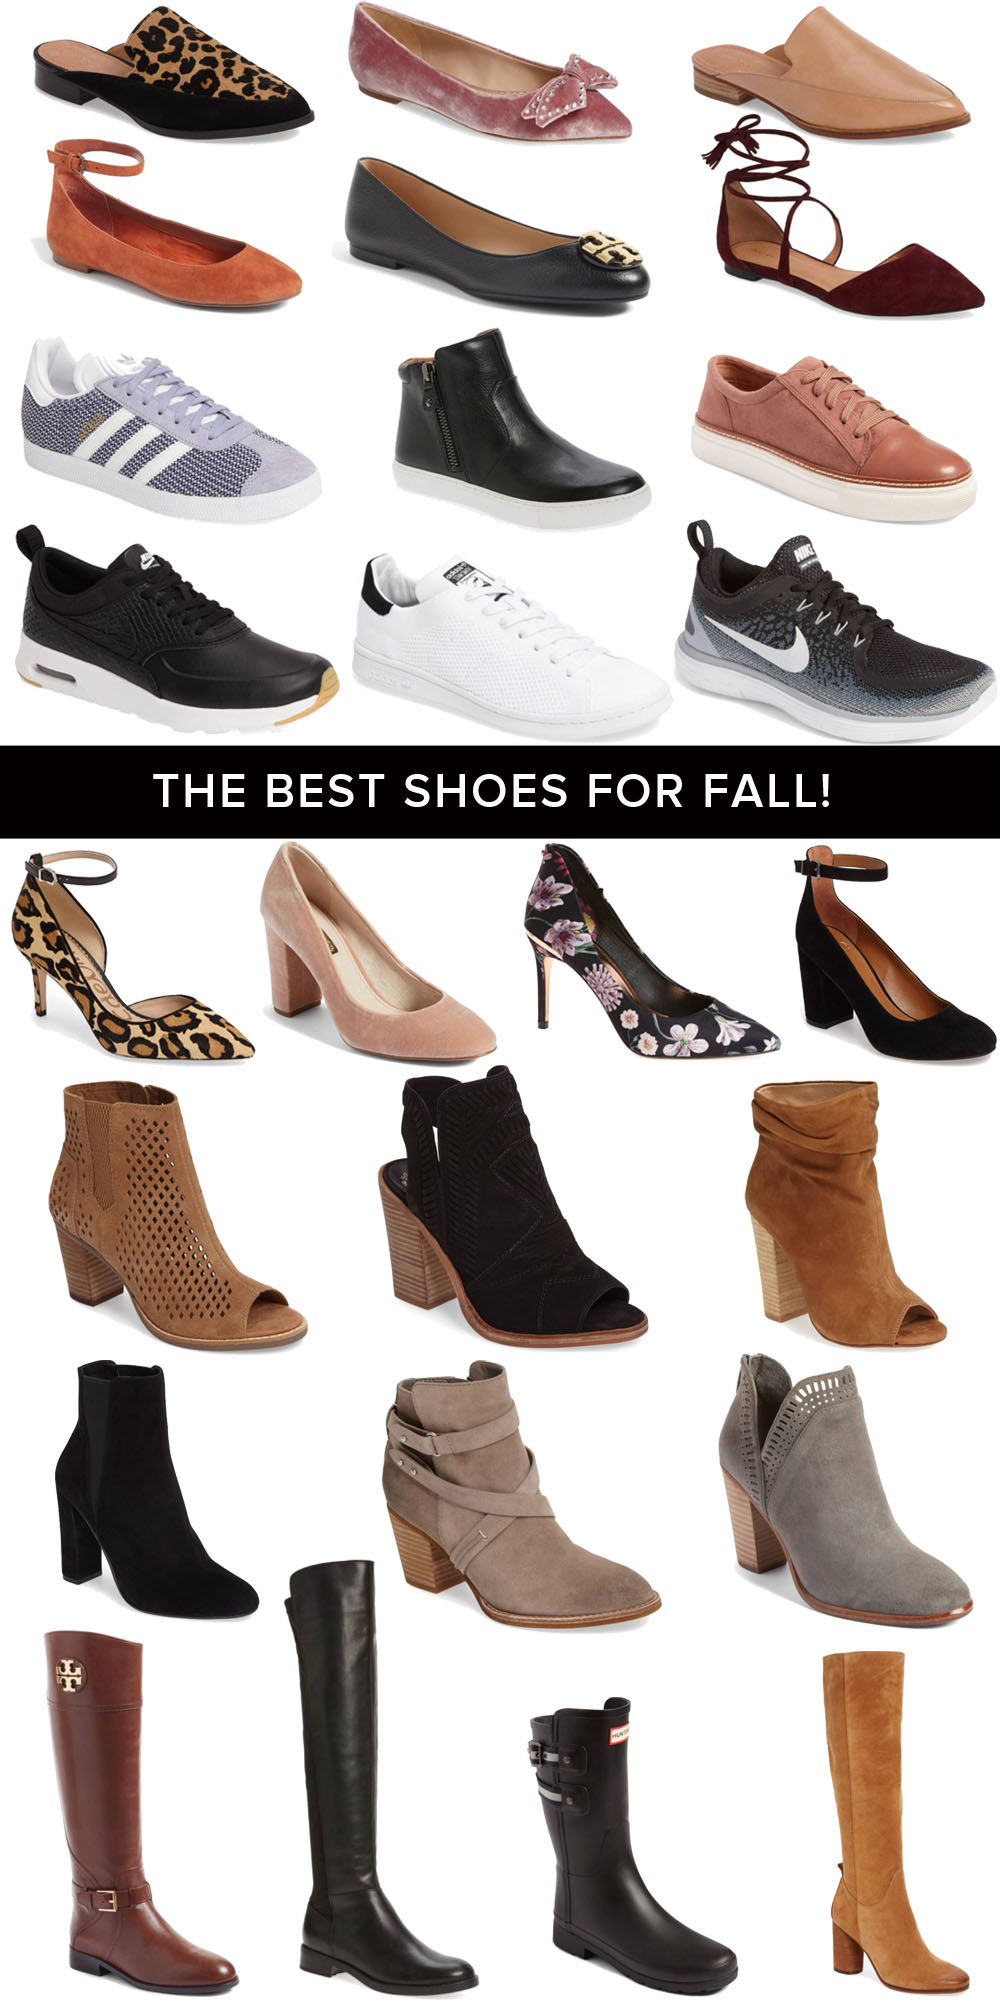 The Best Shoes for Fall (and all currently on sale!)